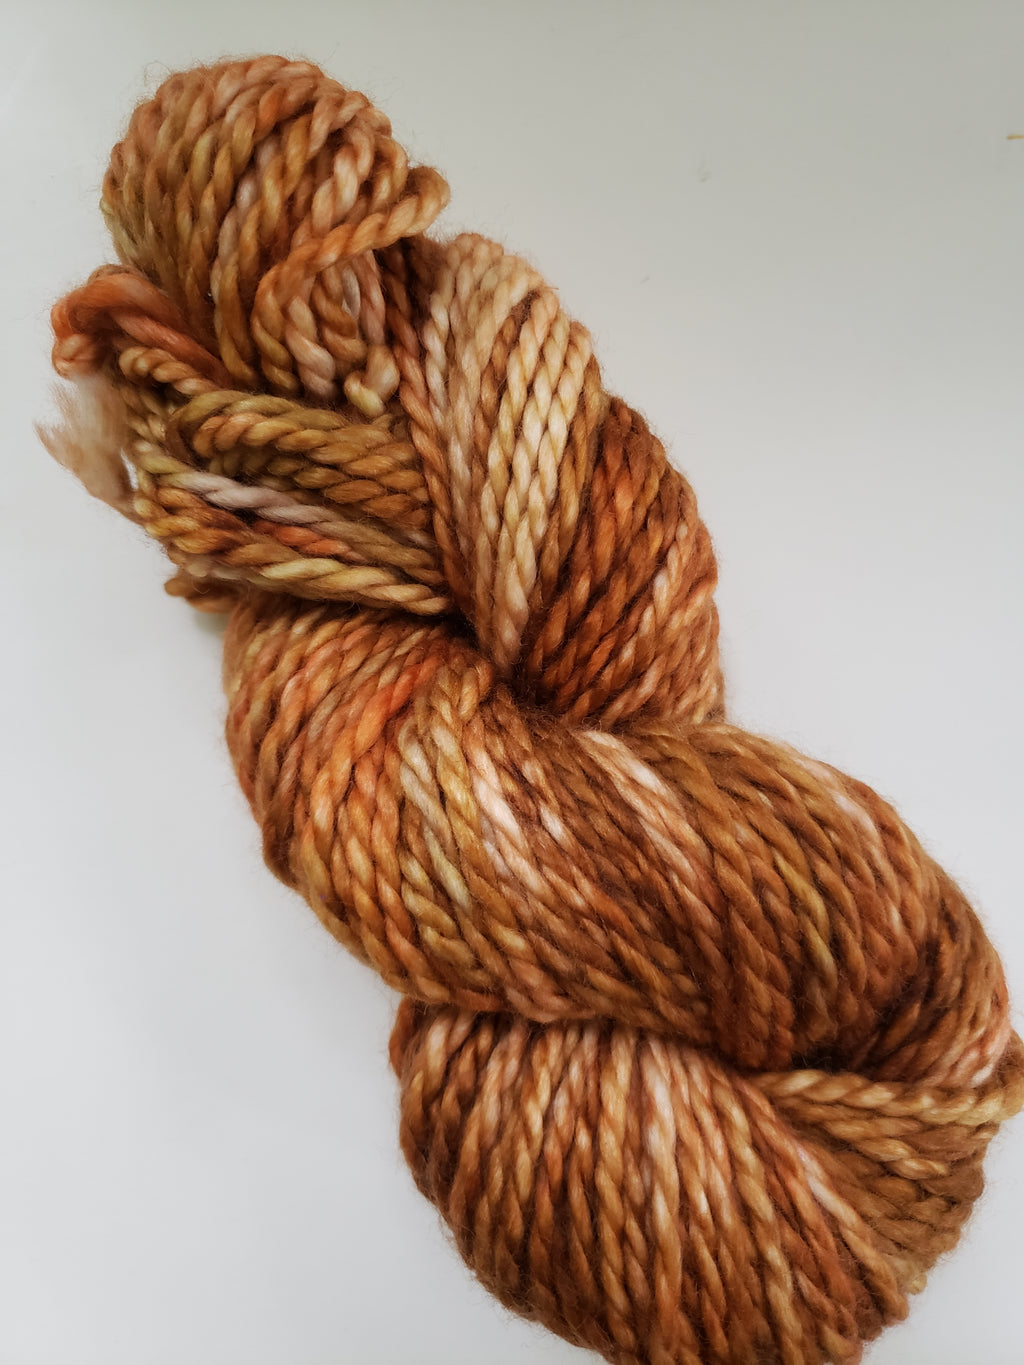 JACK O'LANTERN - BIG TWISTY 2 PLY -  Hand Dyed Shades of Orange, Rust and Beige Chunky Yarn for Rug Hooking - RSS255